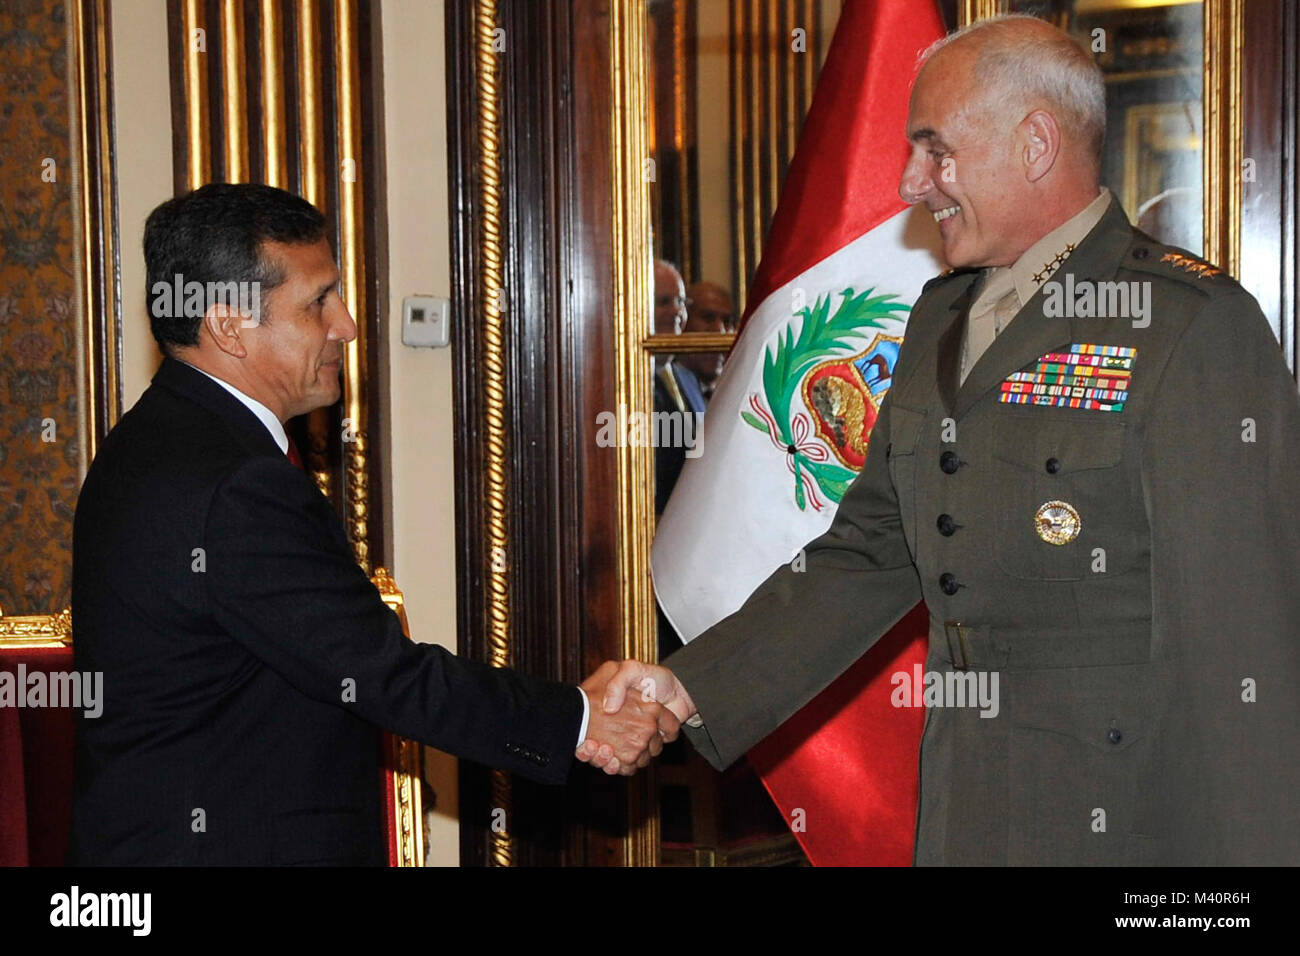 LIMA, Peru (Jan. 22, 2013) -- U.S. Marine Gen. John Kelly, commander of U.S. Southern Command, is greeted by Peruvian President Ollanta Humala.  Kelly was in Peru Jan. 21 - 23 to meet with senior defense and government officials to discuss shared security concerns and cooperation.  (Photo courtesy of Presidential Palace, Peru) 130122-A-BS728-001 by ussouthcom Stock Photo